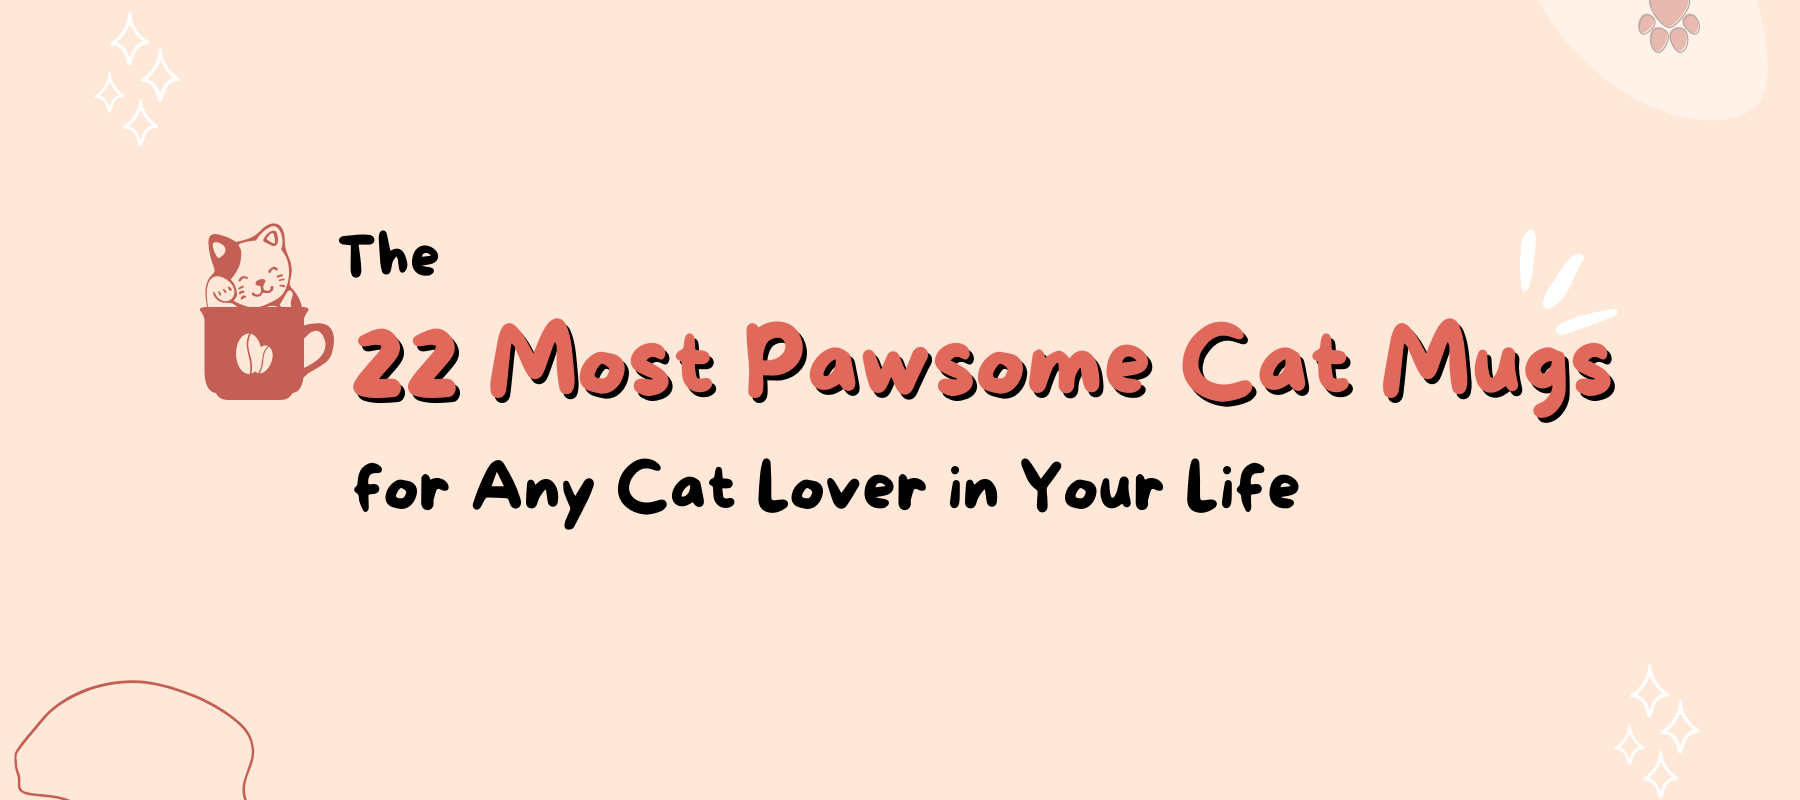 The 22 Most Pawsome Cat Mugs for Any Cat Lover in Your Life